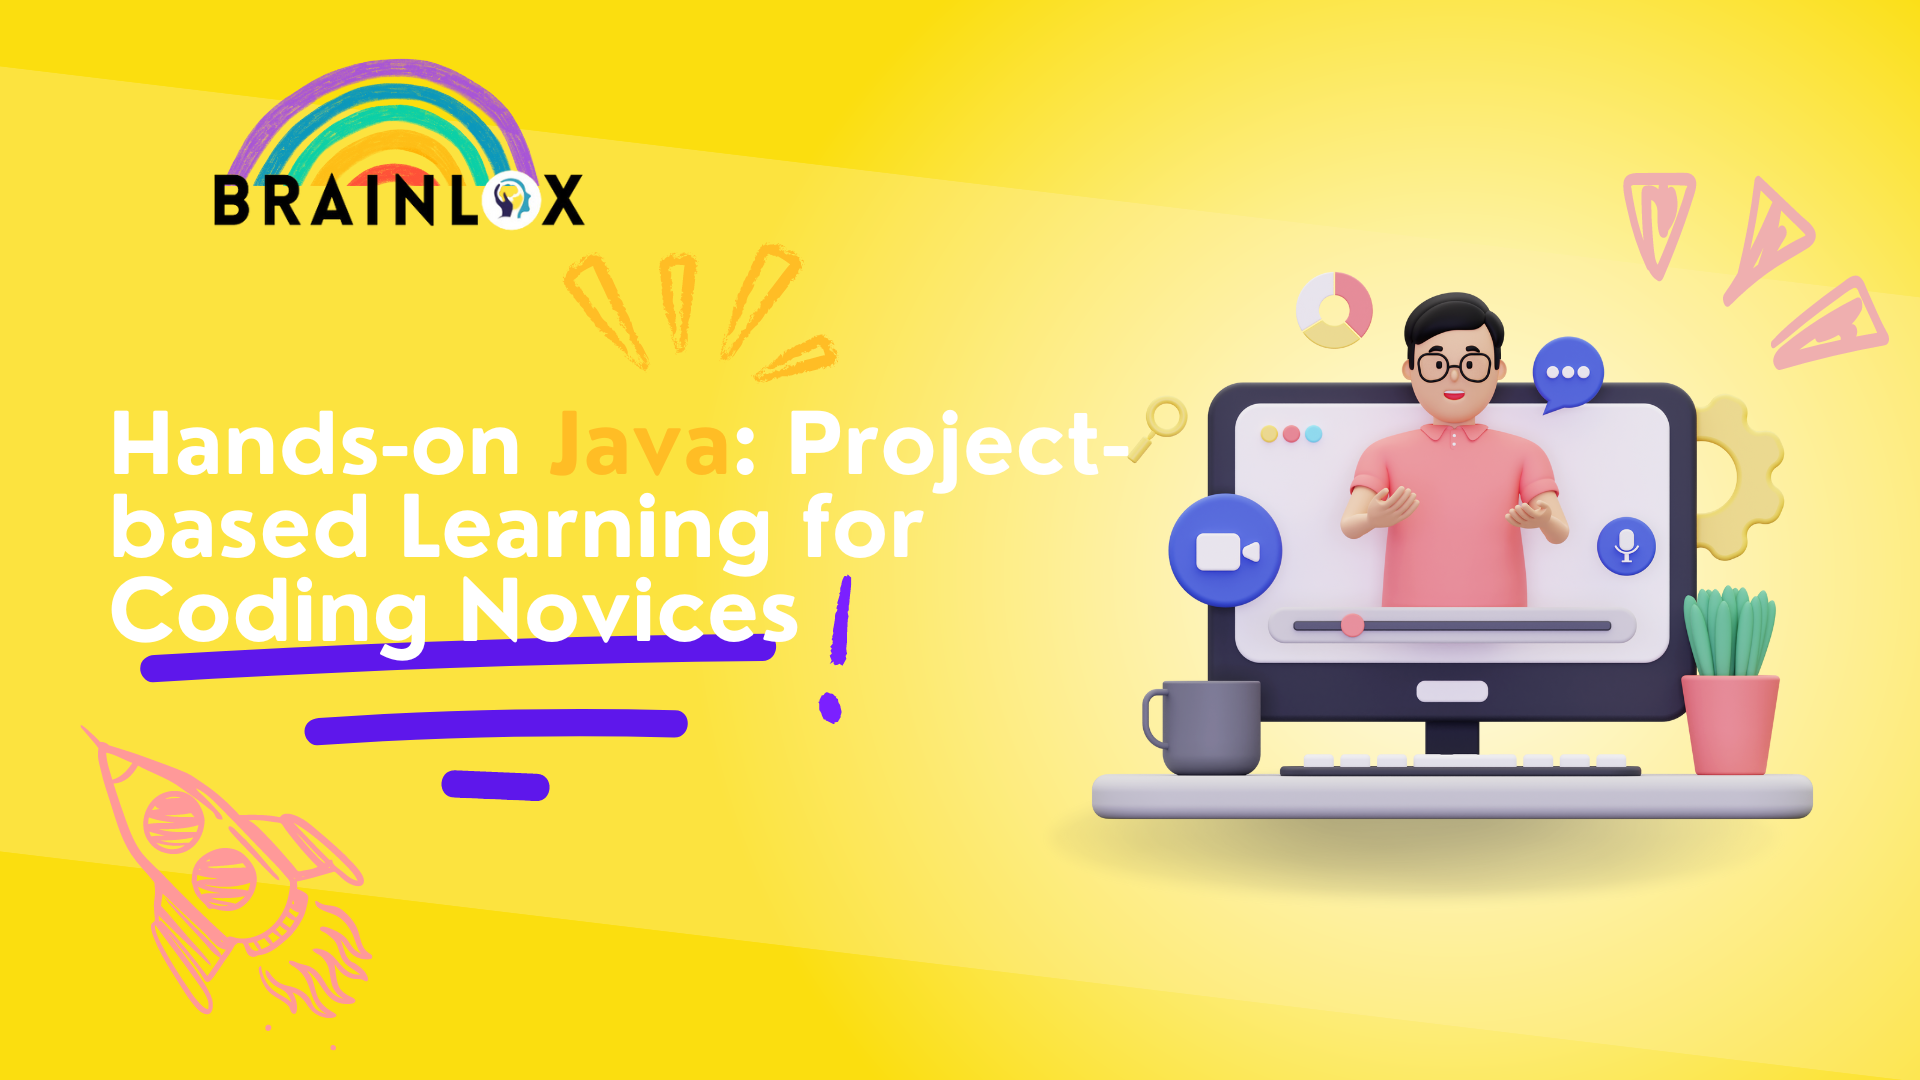 Hands-on Java: Project-based Learning for Coding Novices